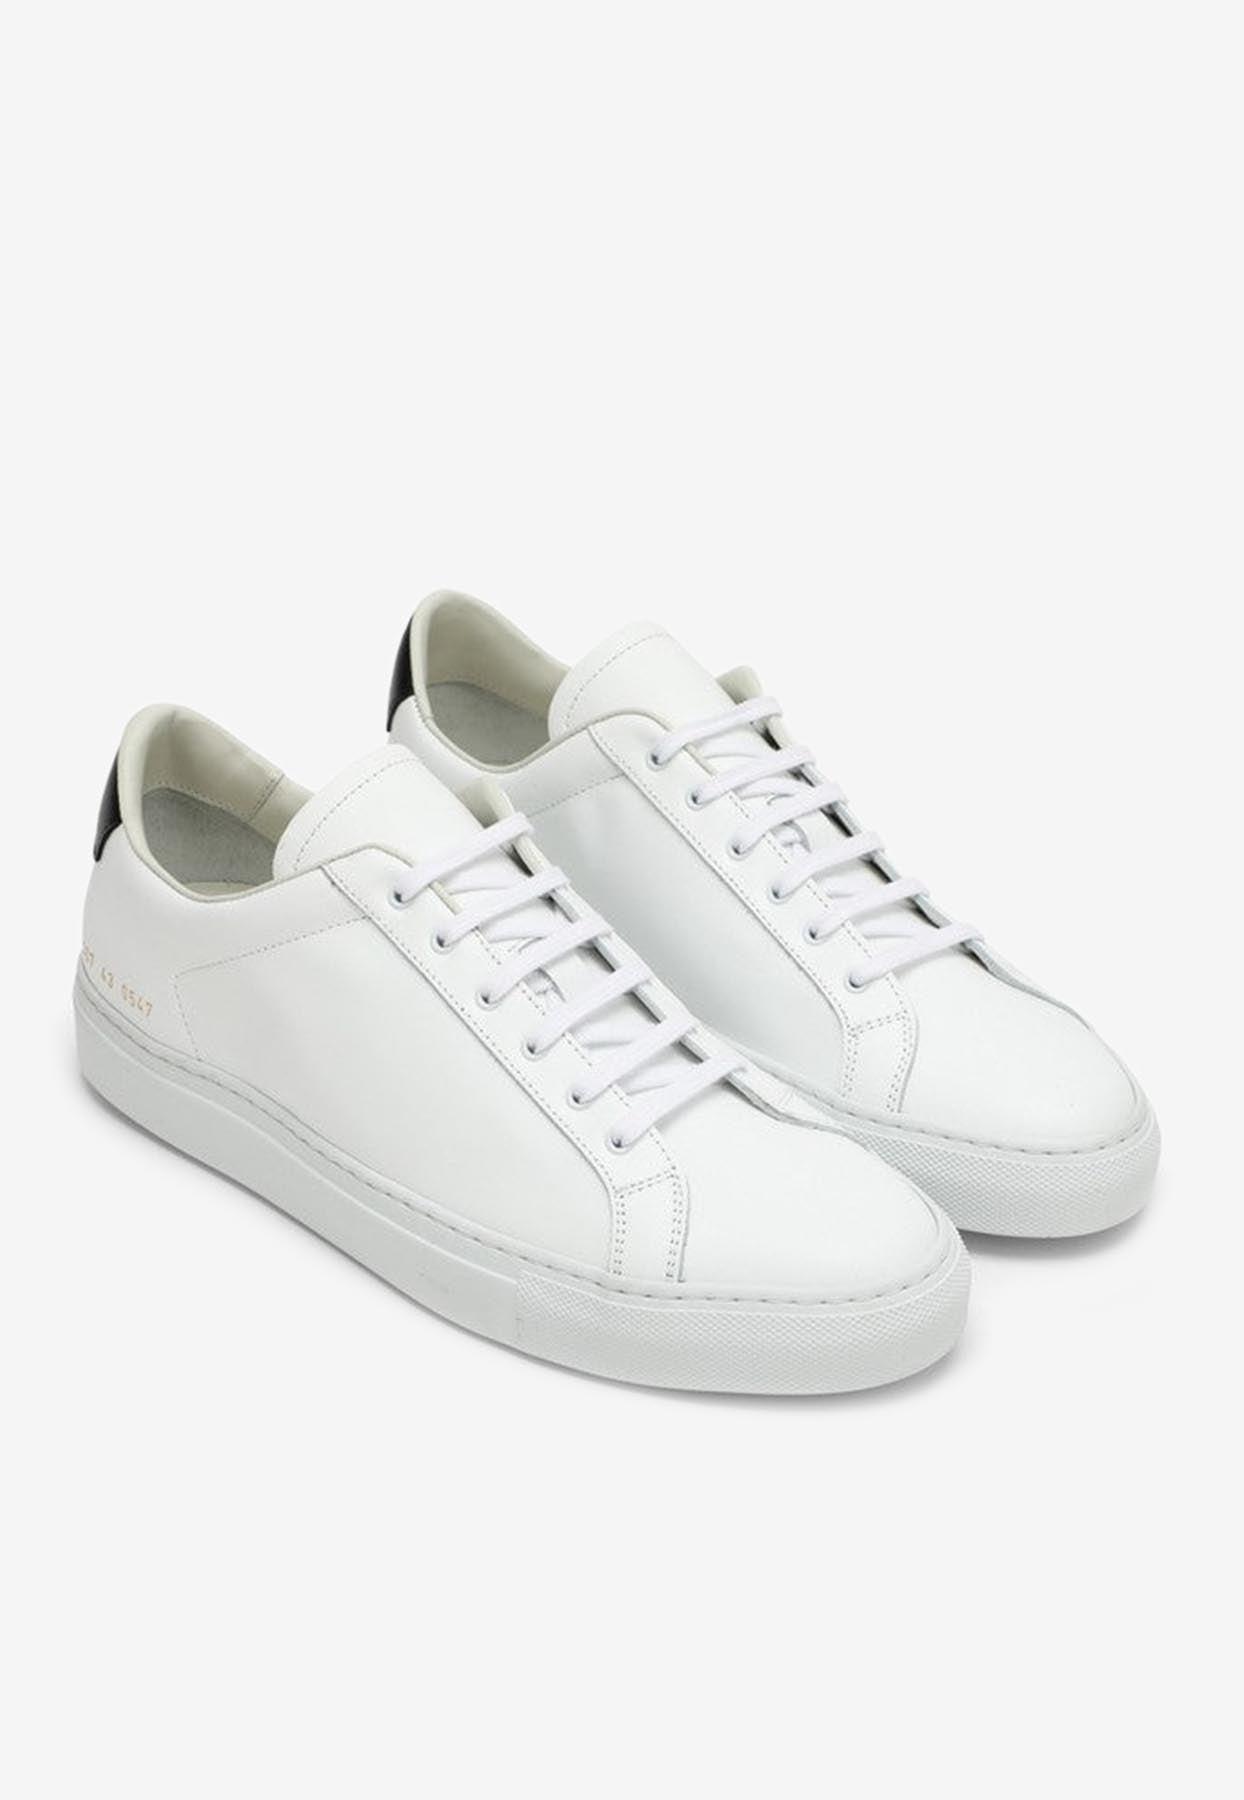 Projects 2367 Retro Low White/black for Men